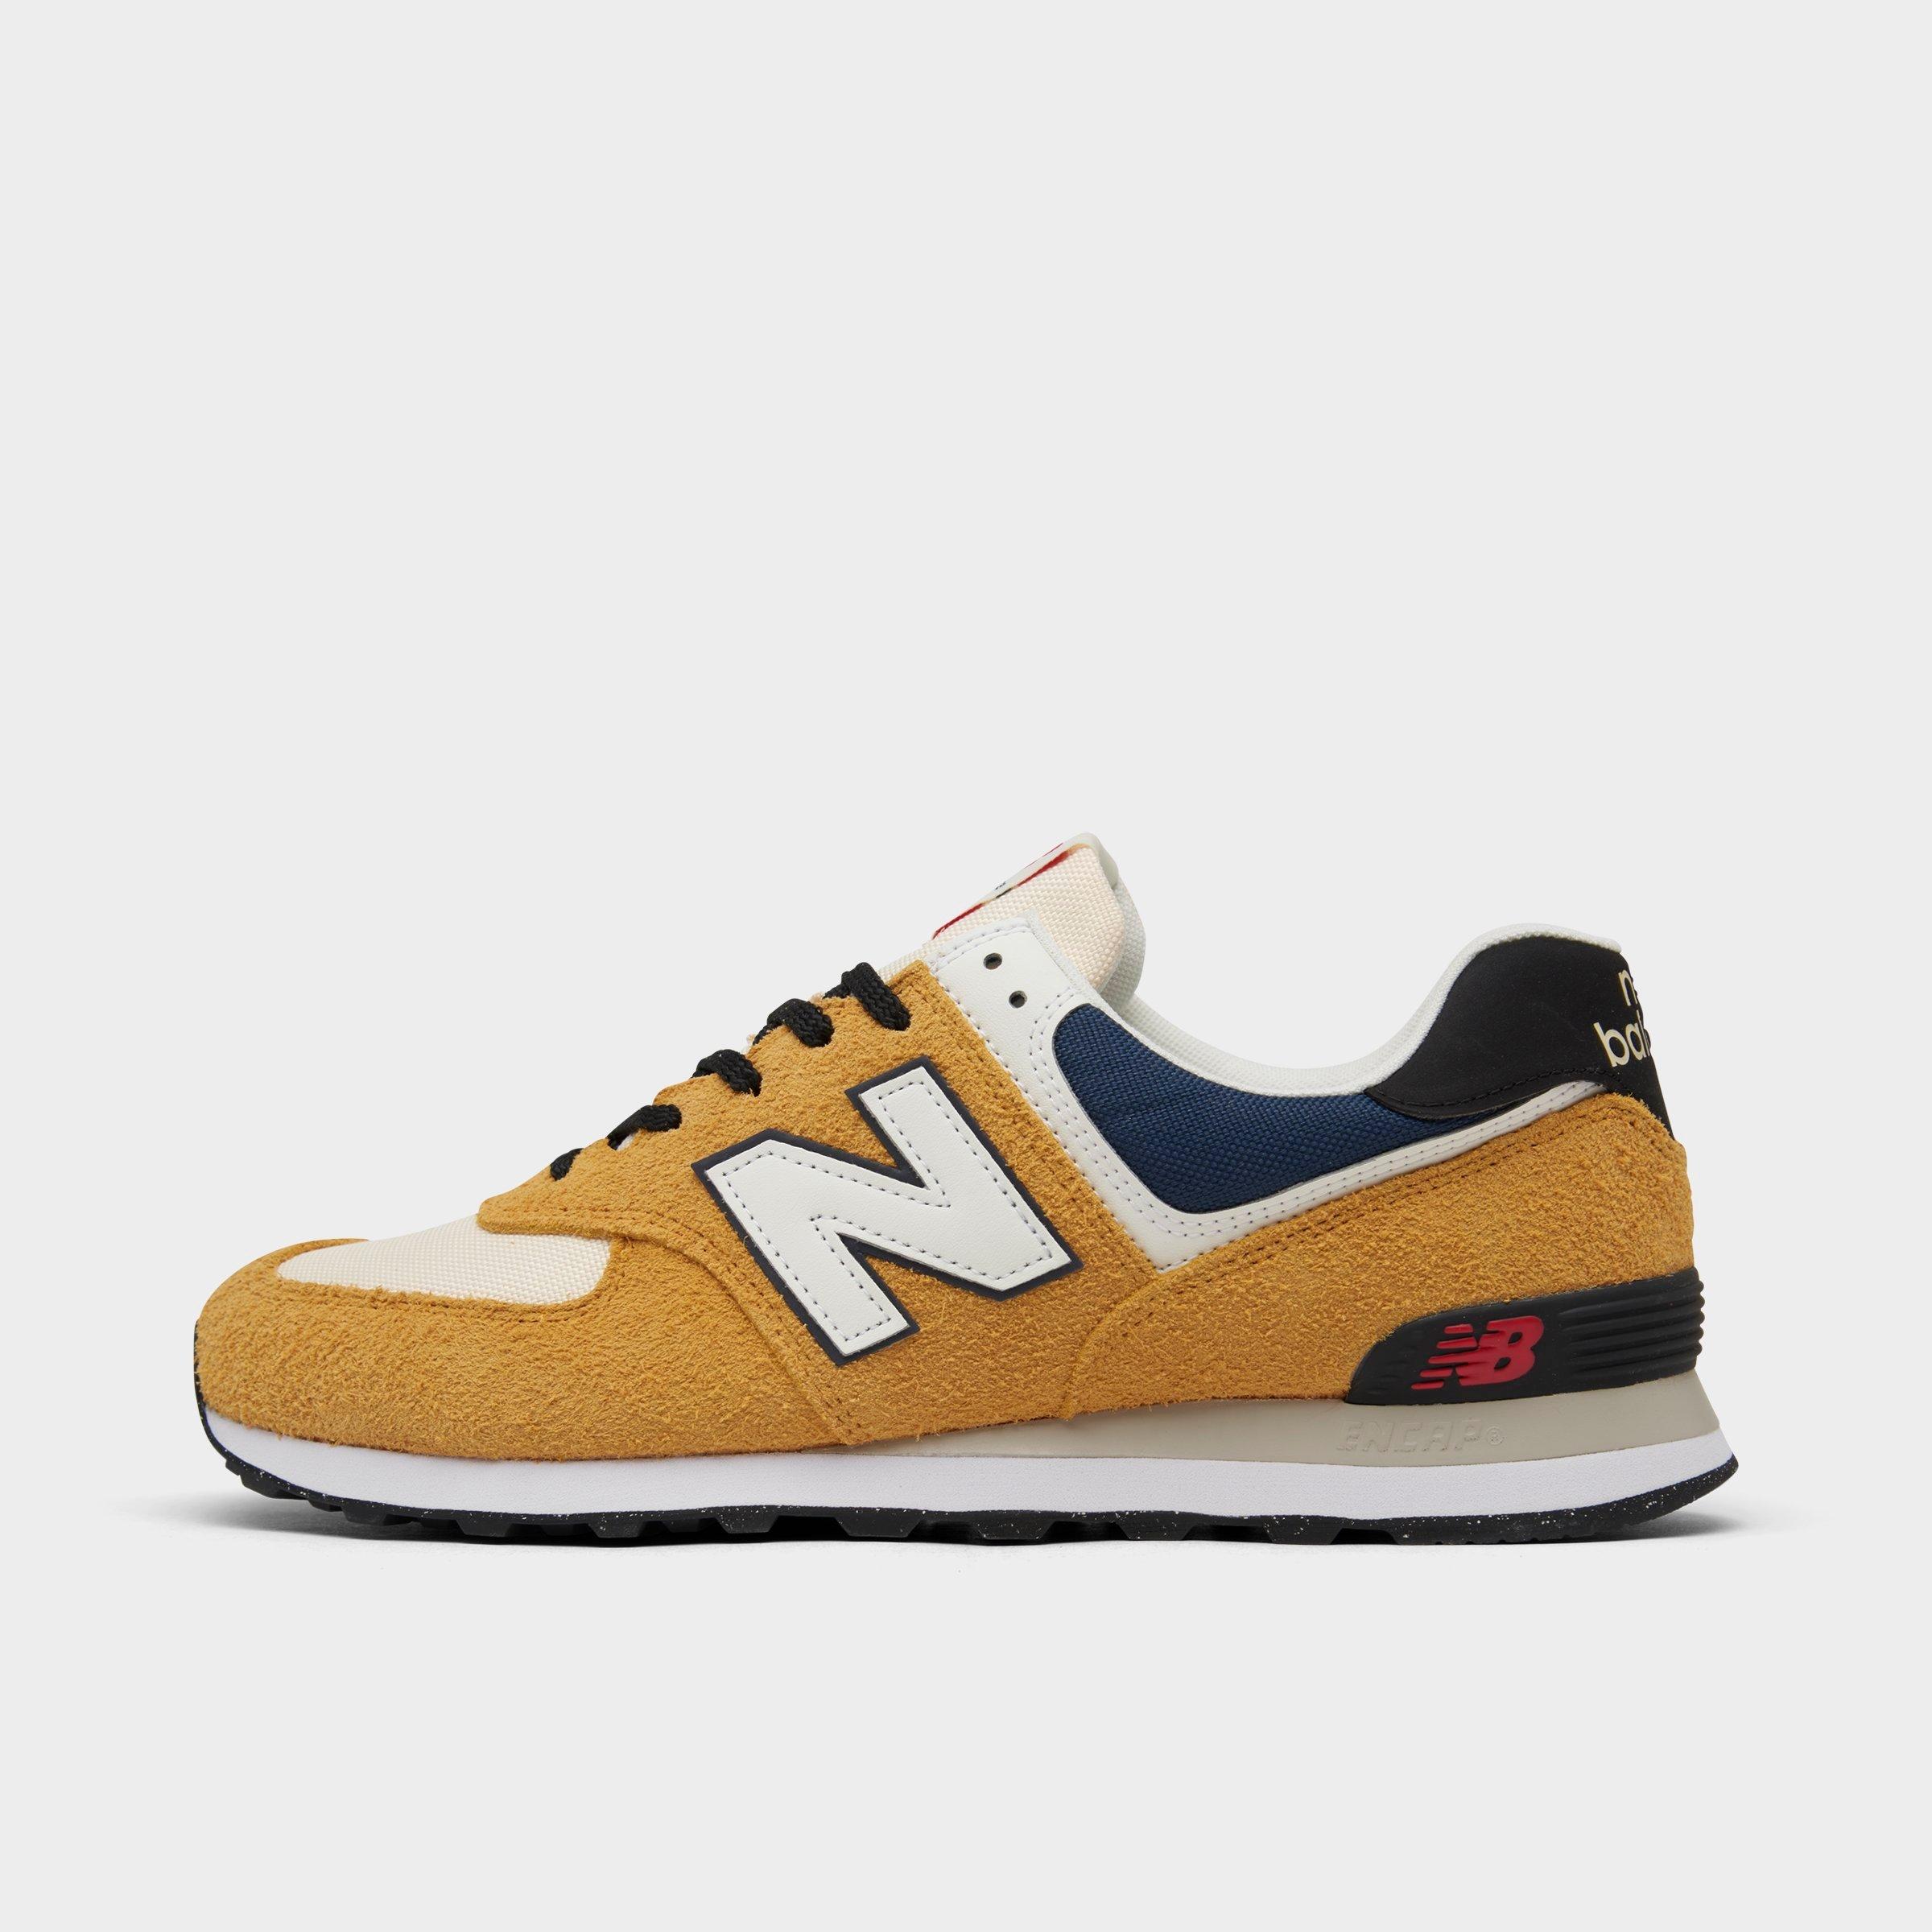 New Balance 574 Casual Size 13.0 Suede In Yellow/white/natural Indigo | ModeSens